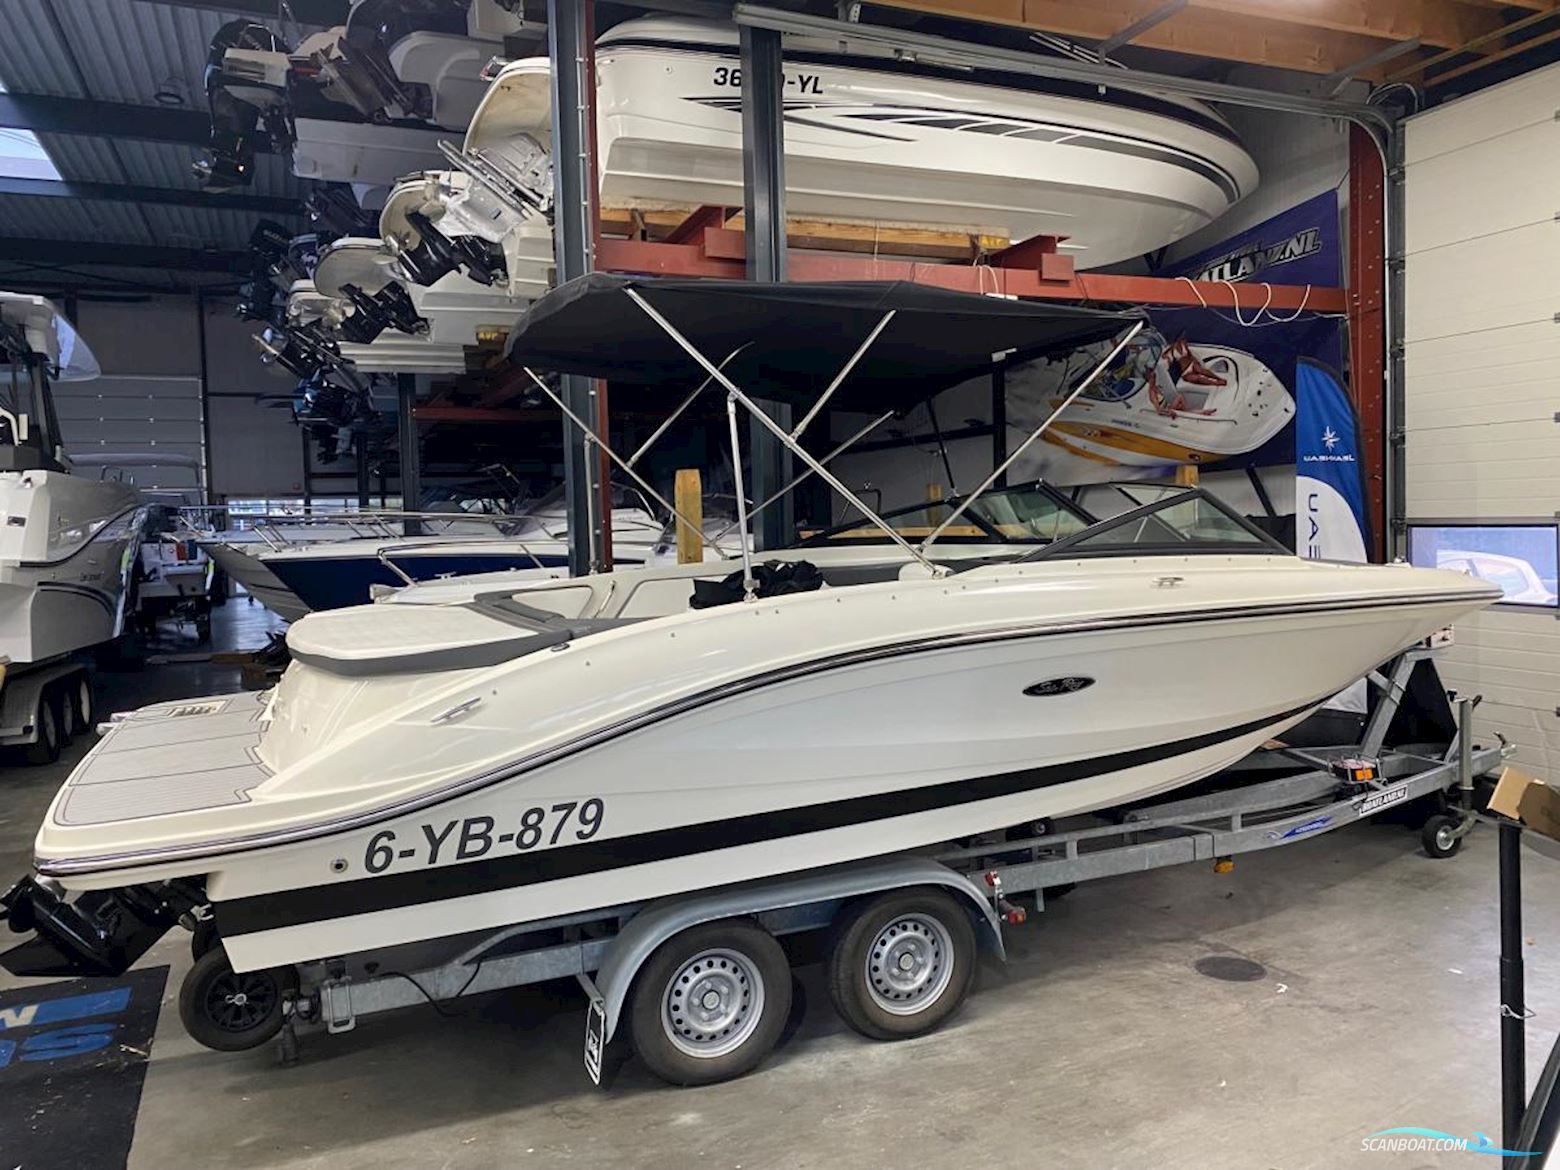 Sea Ray 210 Spx Motor boat 2017, with Mercruiser 250 engine, The Netherlands